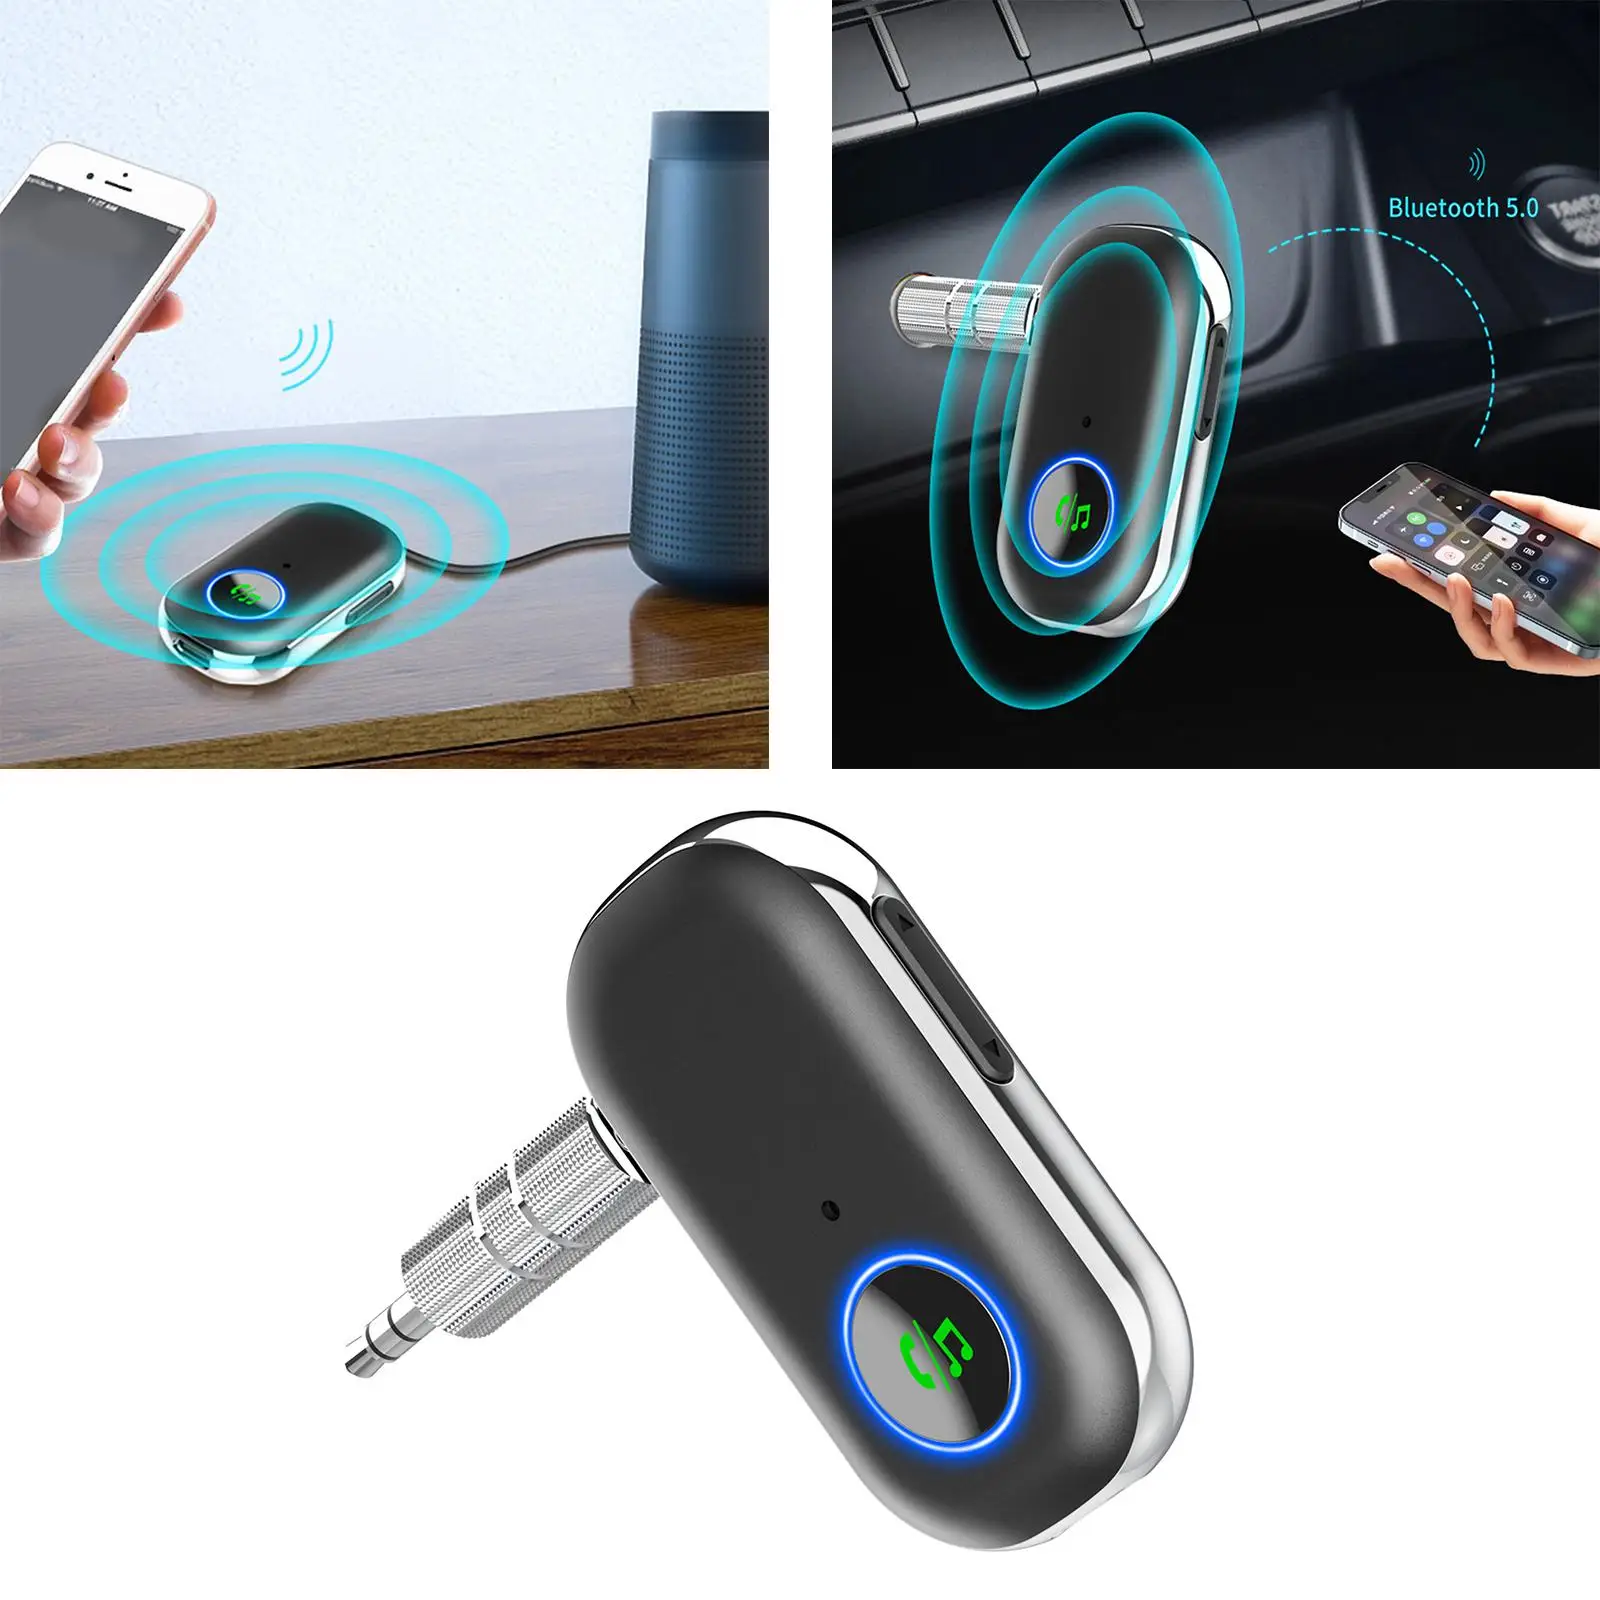 Bluetooth 5.0 Receiver for Car Bluetooth Car Adapter Portable with Volume Control with 3.5mm Audio Cable for Hands Free Call